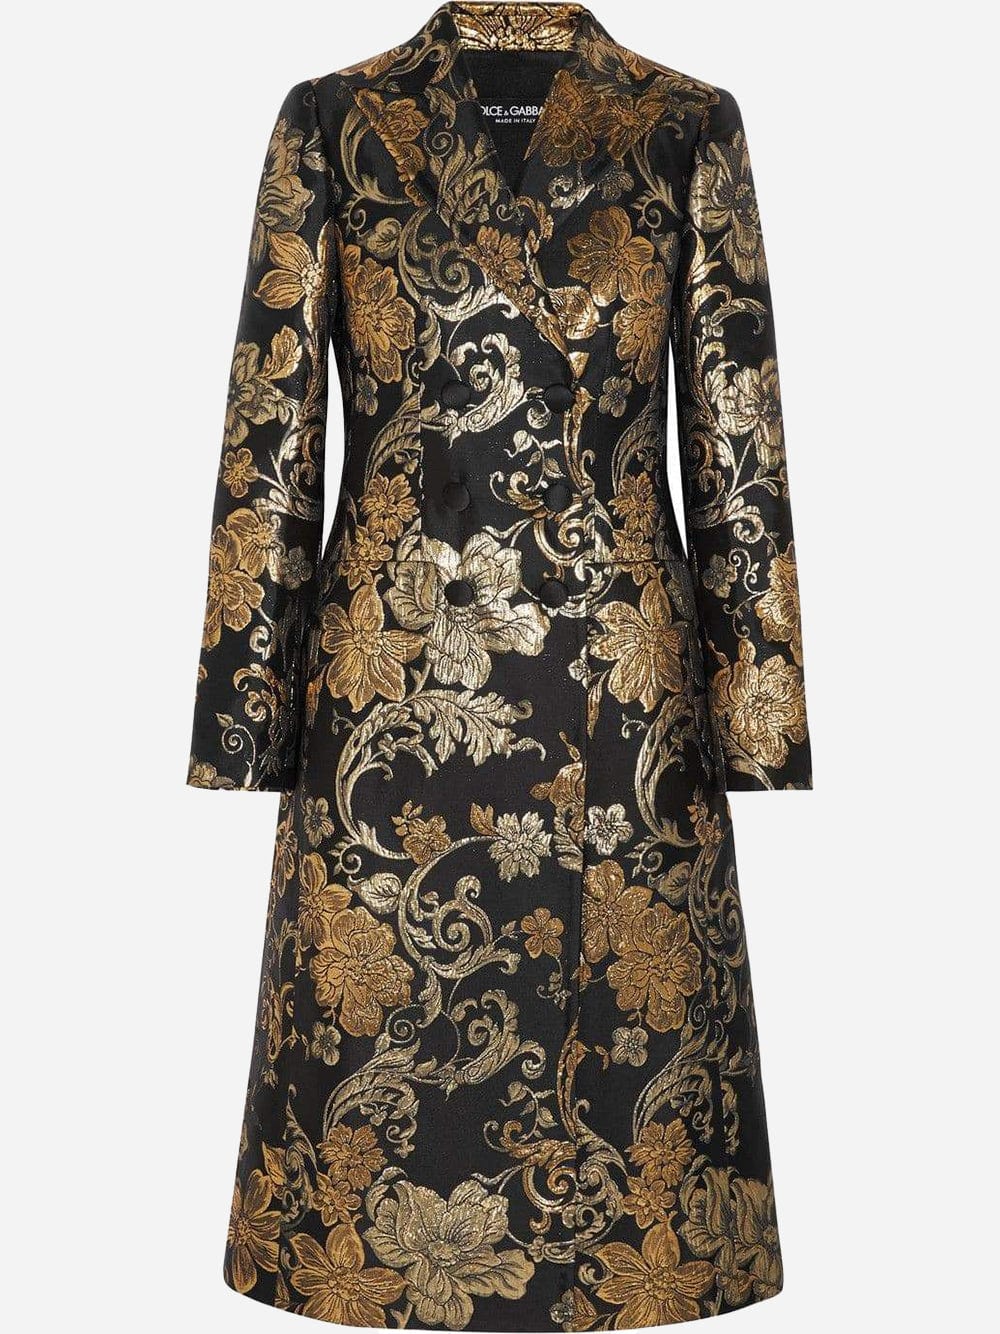 Dolce & Gabbana Double-Breasted Floral-Jacquard Coat